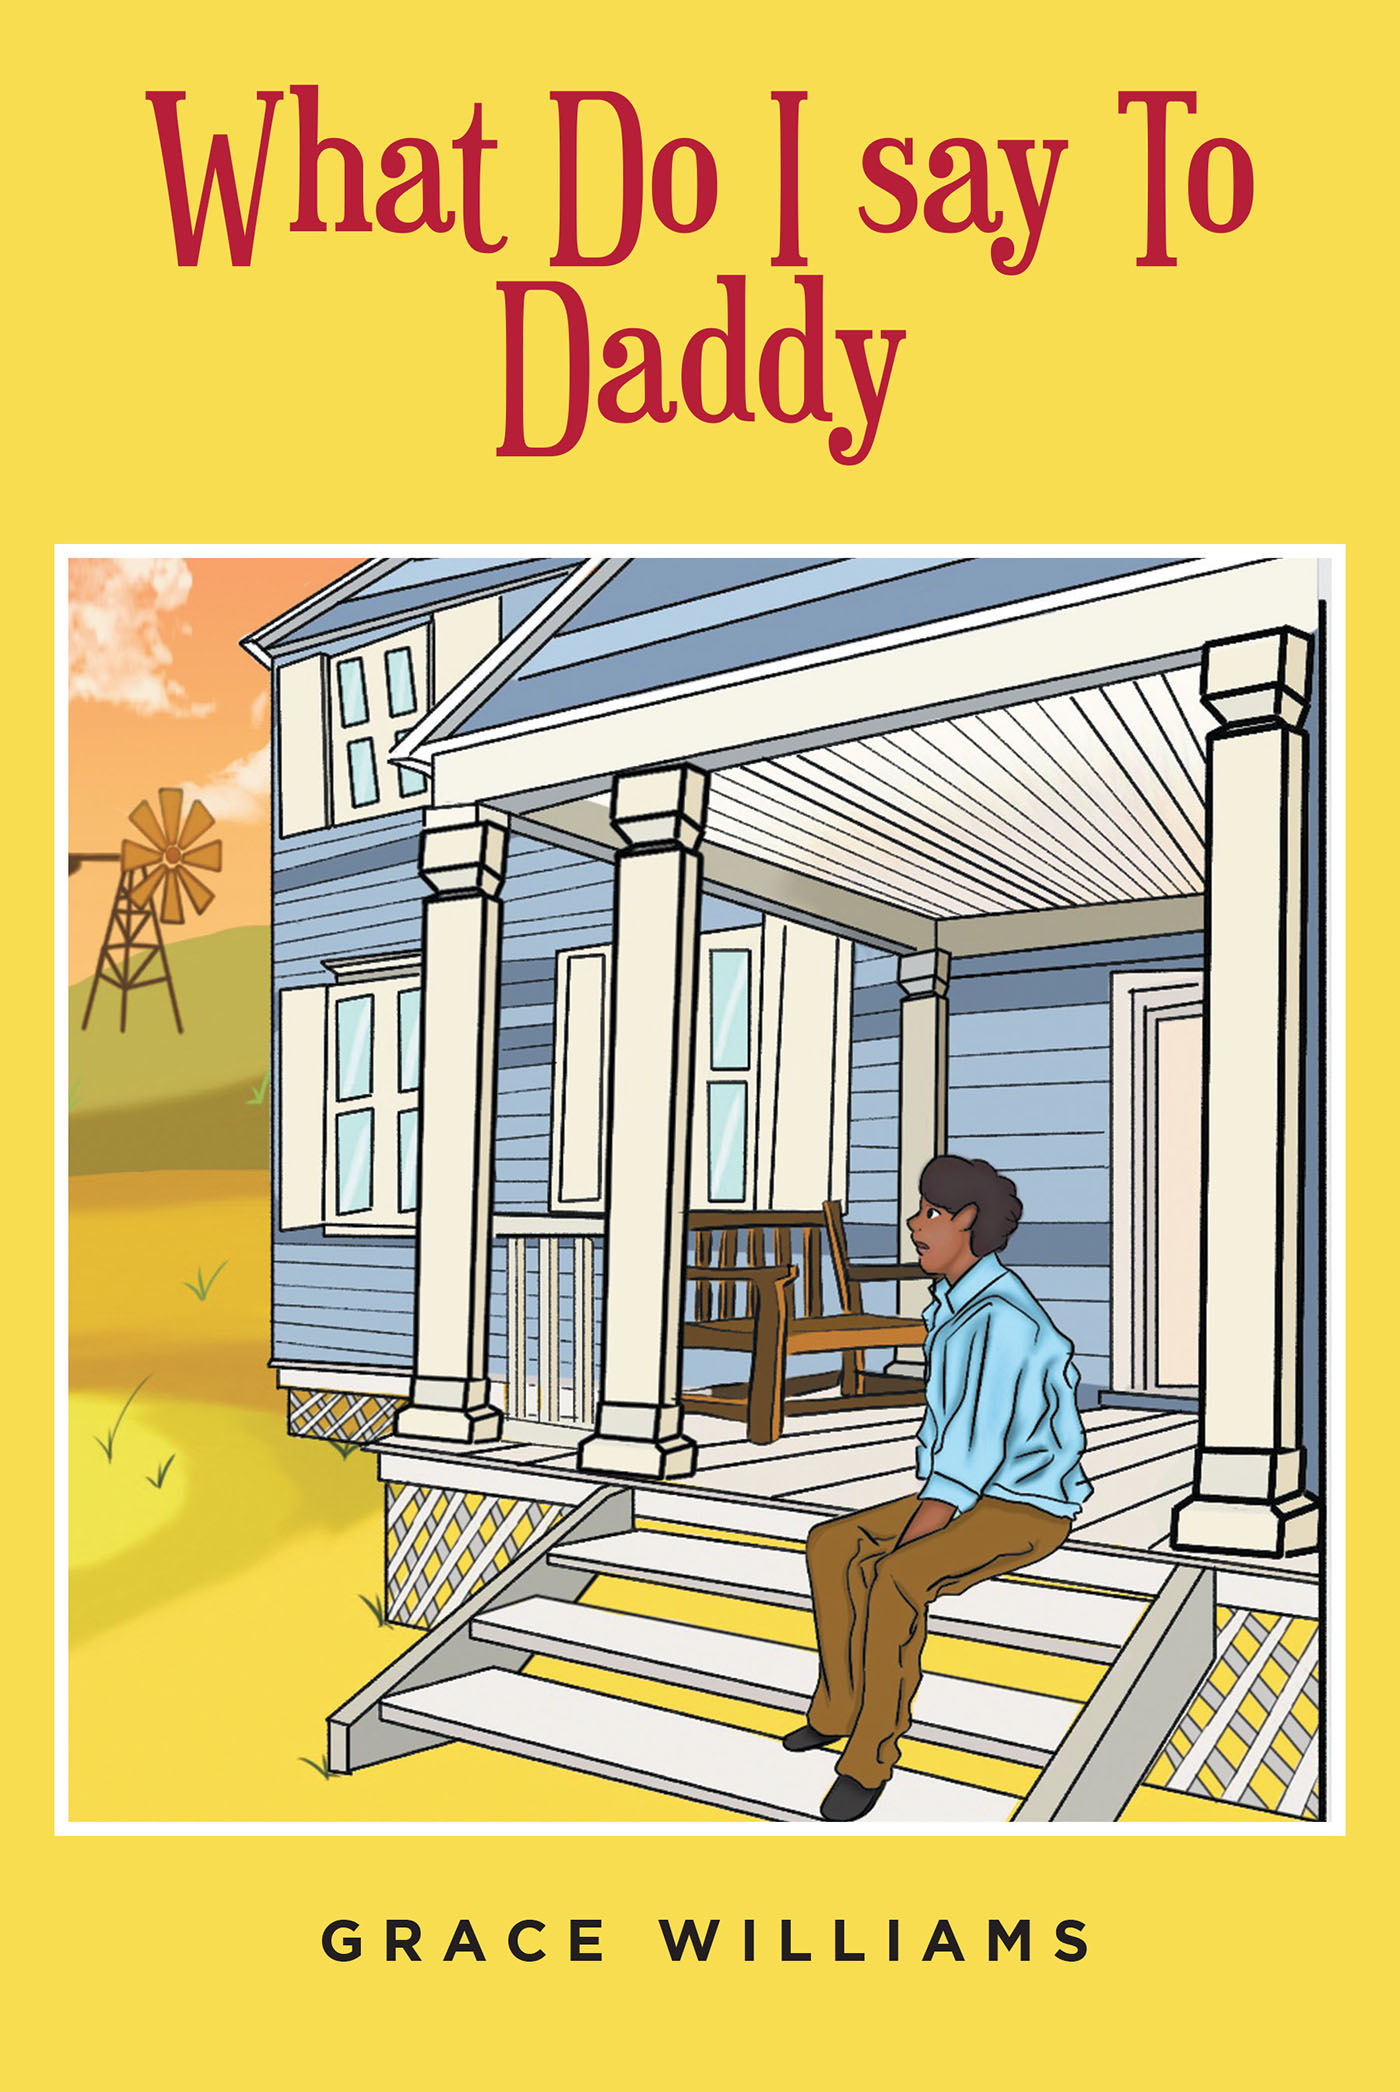 Grace Williams’s New Book, "What Do I Say to Daddy," is a Moving Exploration Into the Ups and Downs of an Affluent Black Military Family Living in the South